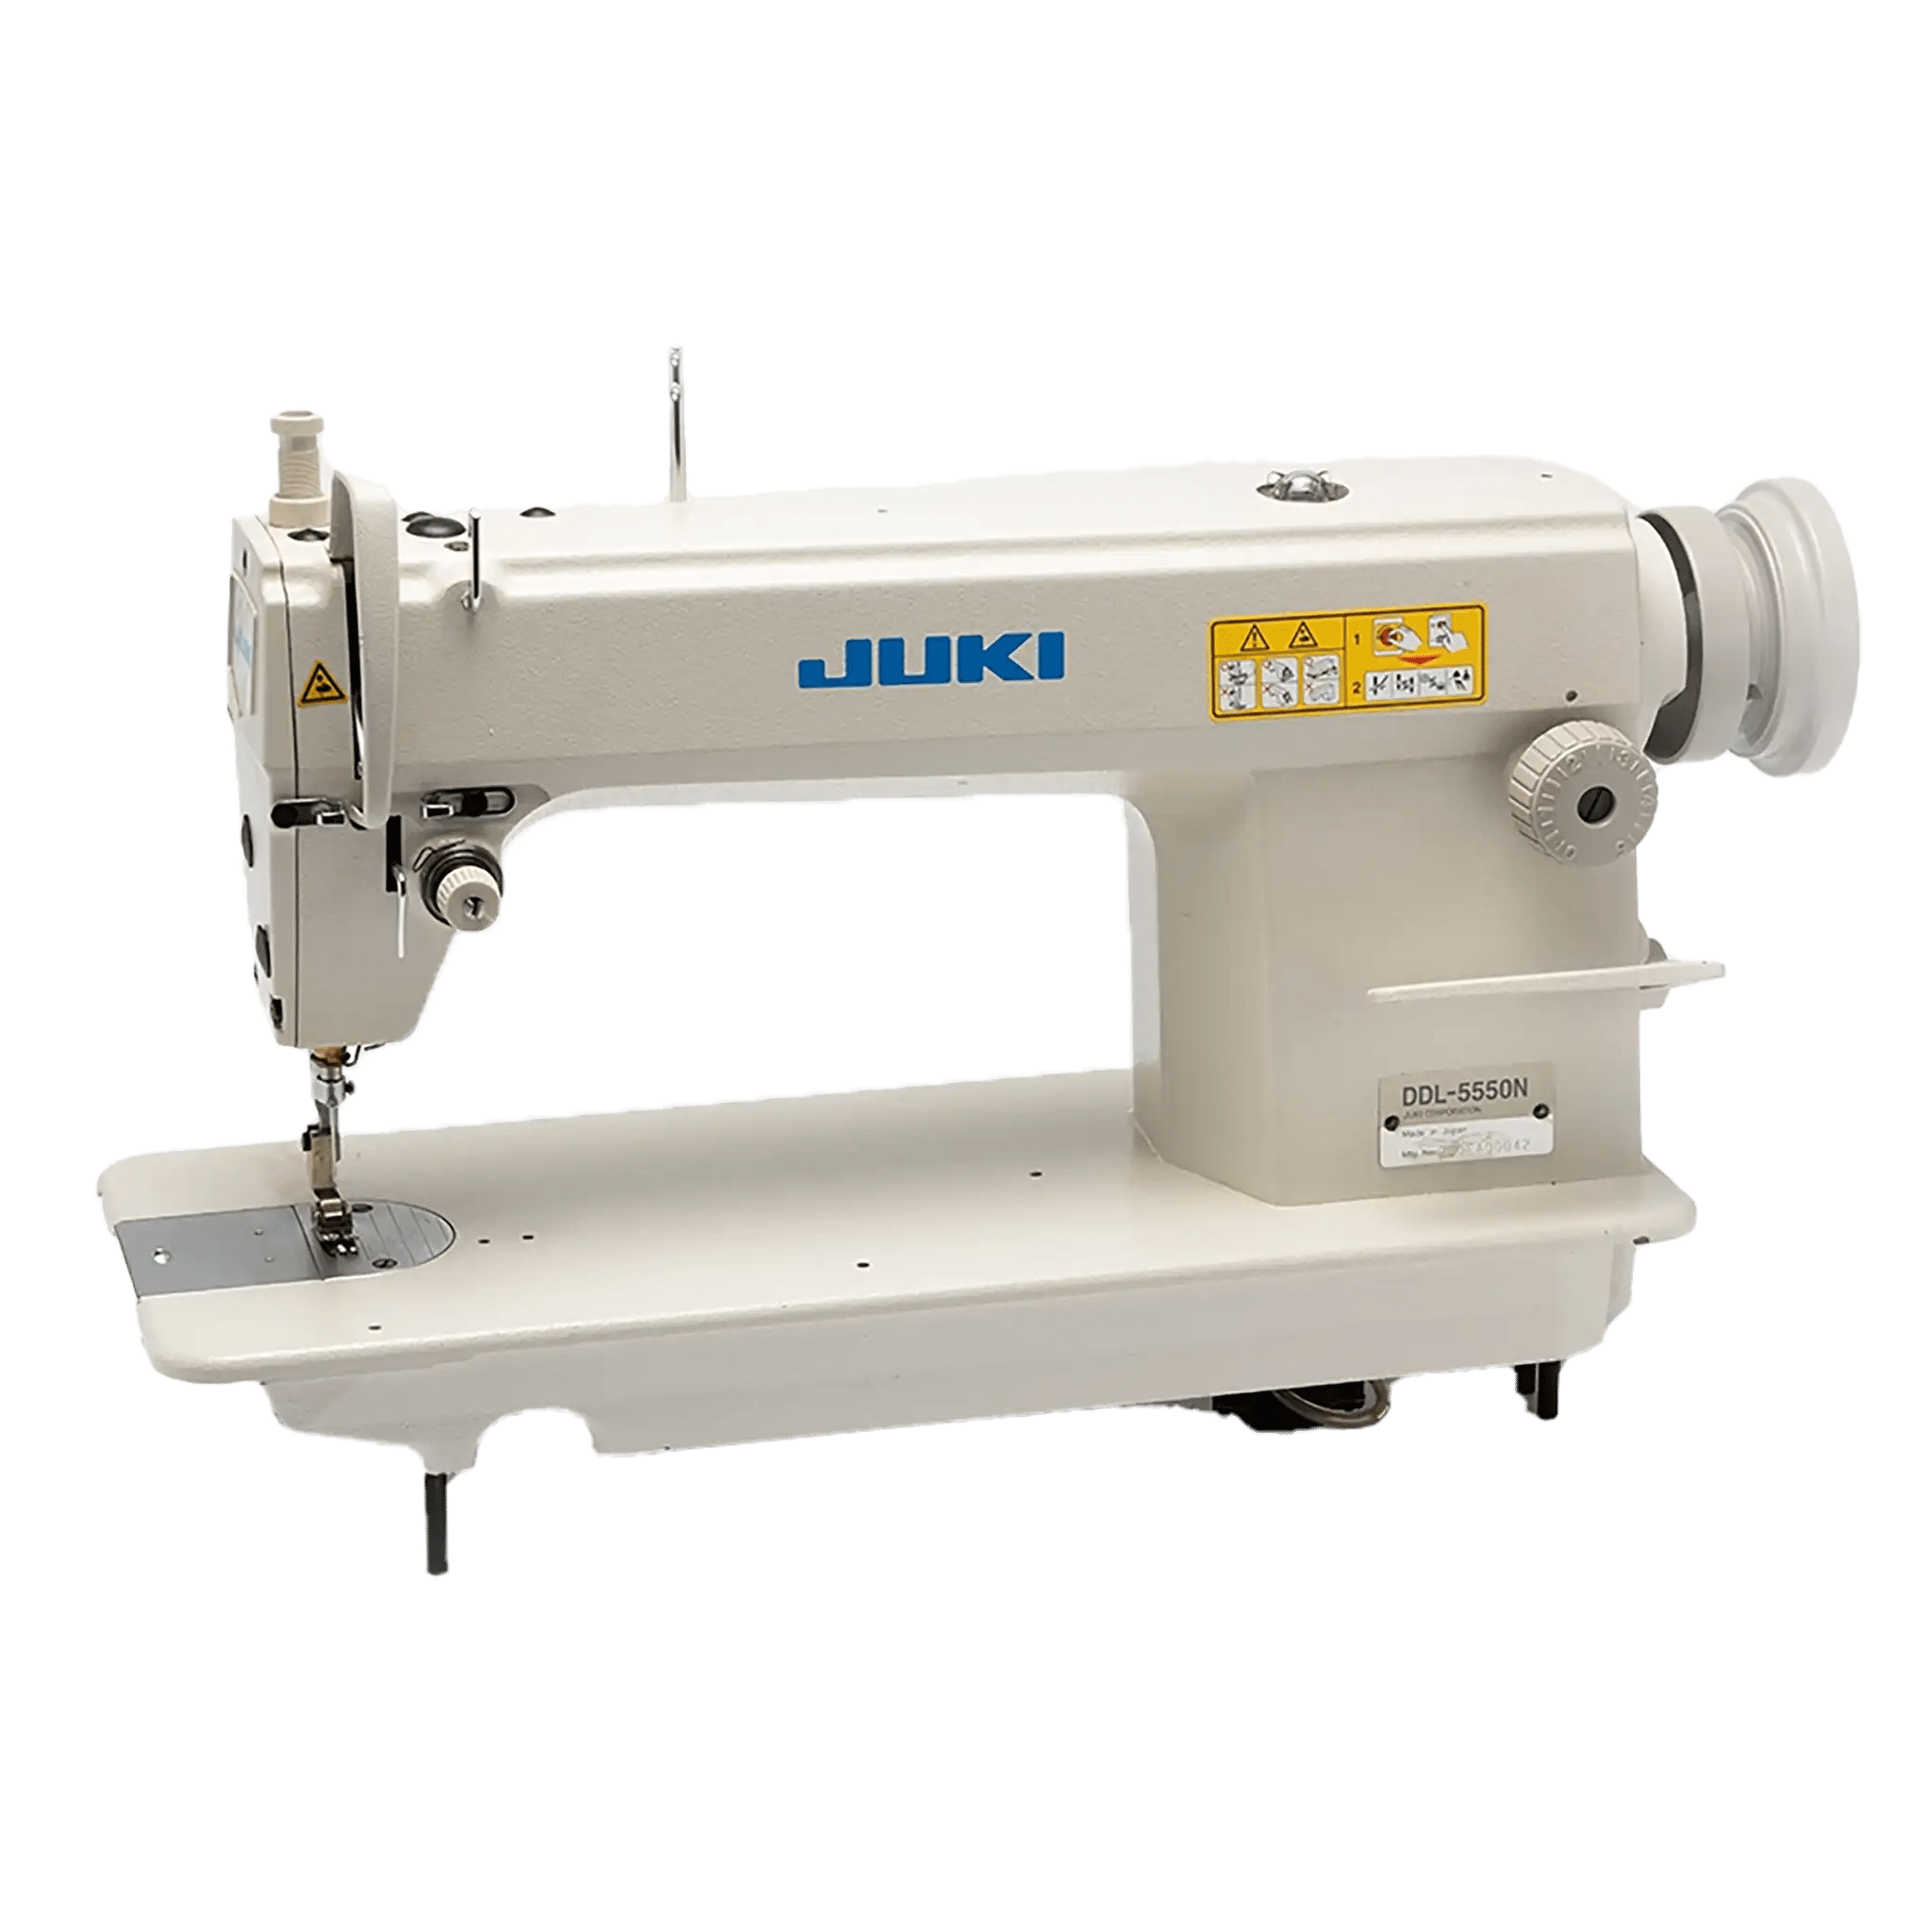 Juki Home and Industrial Machines